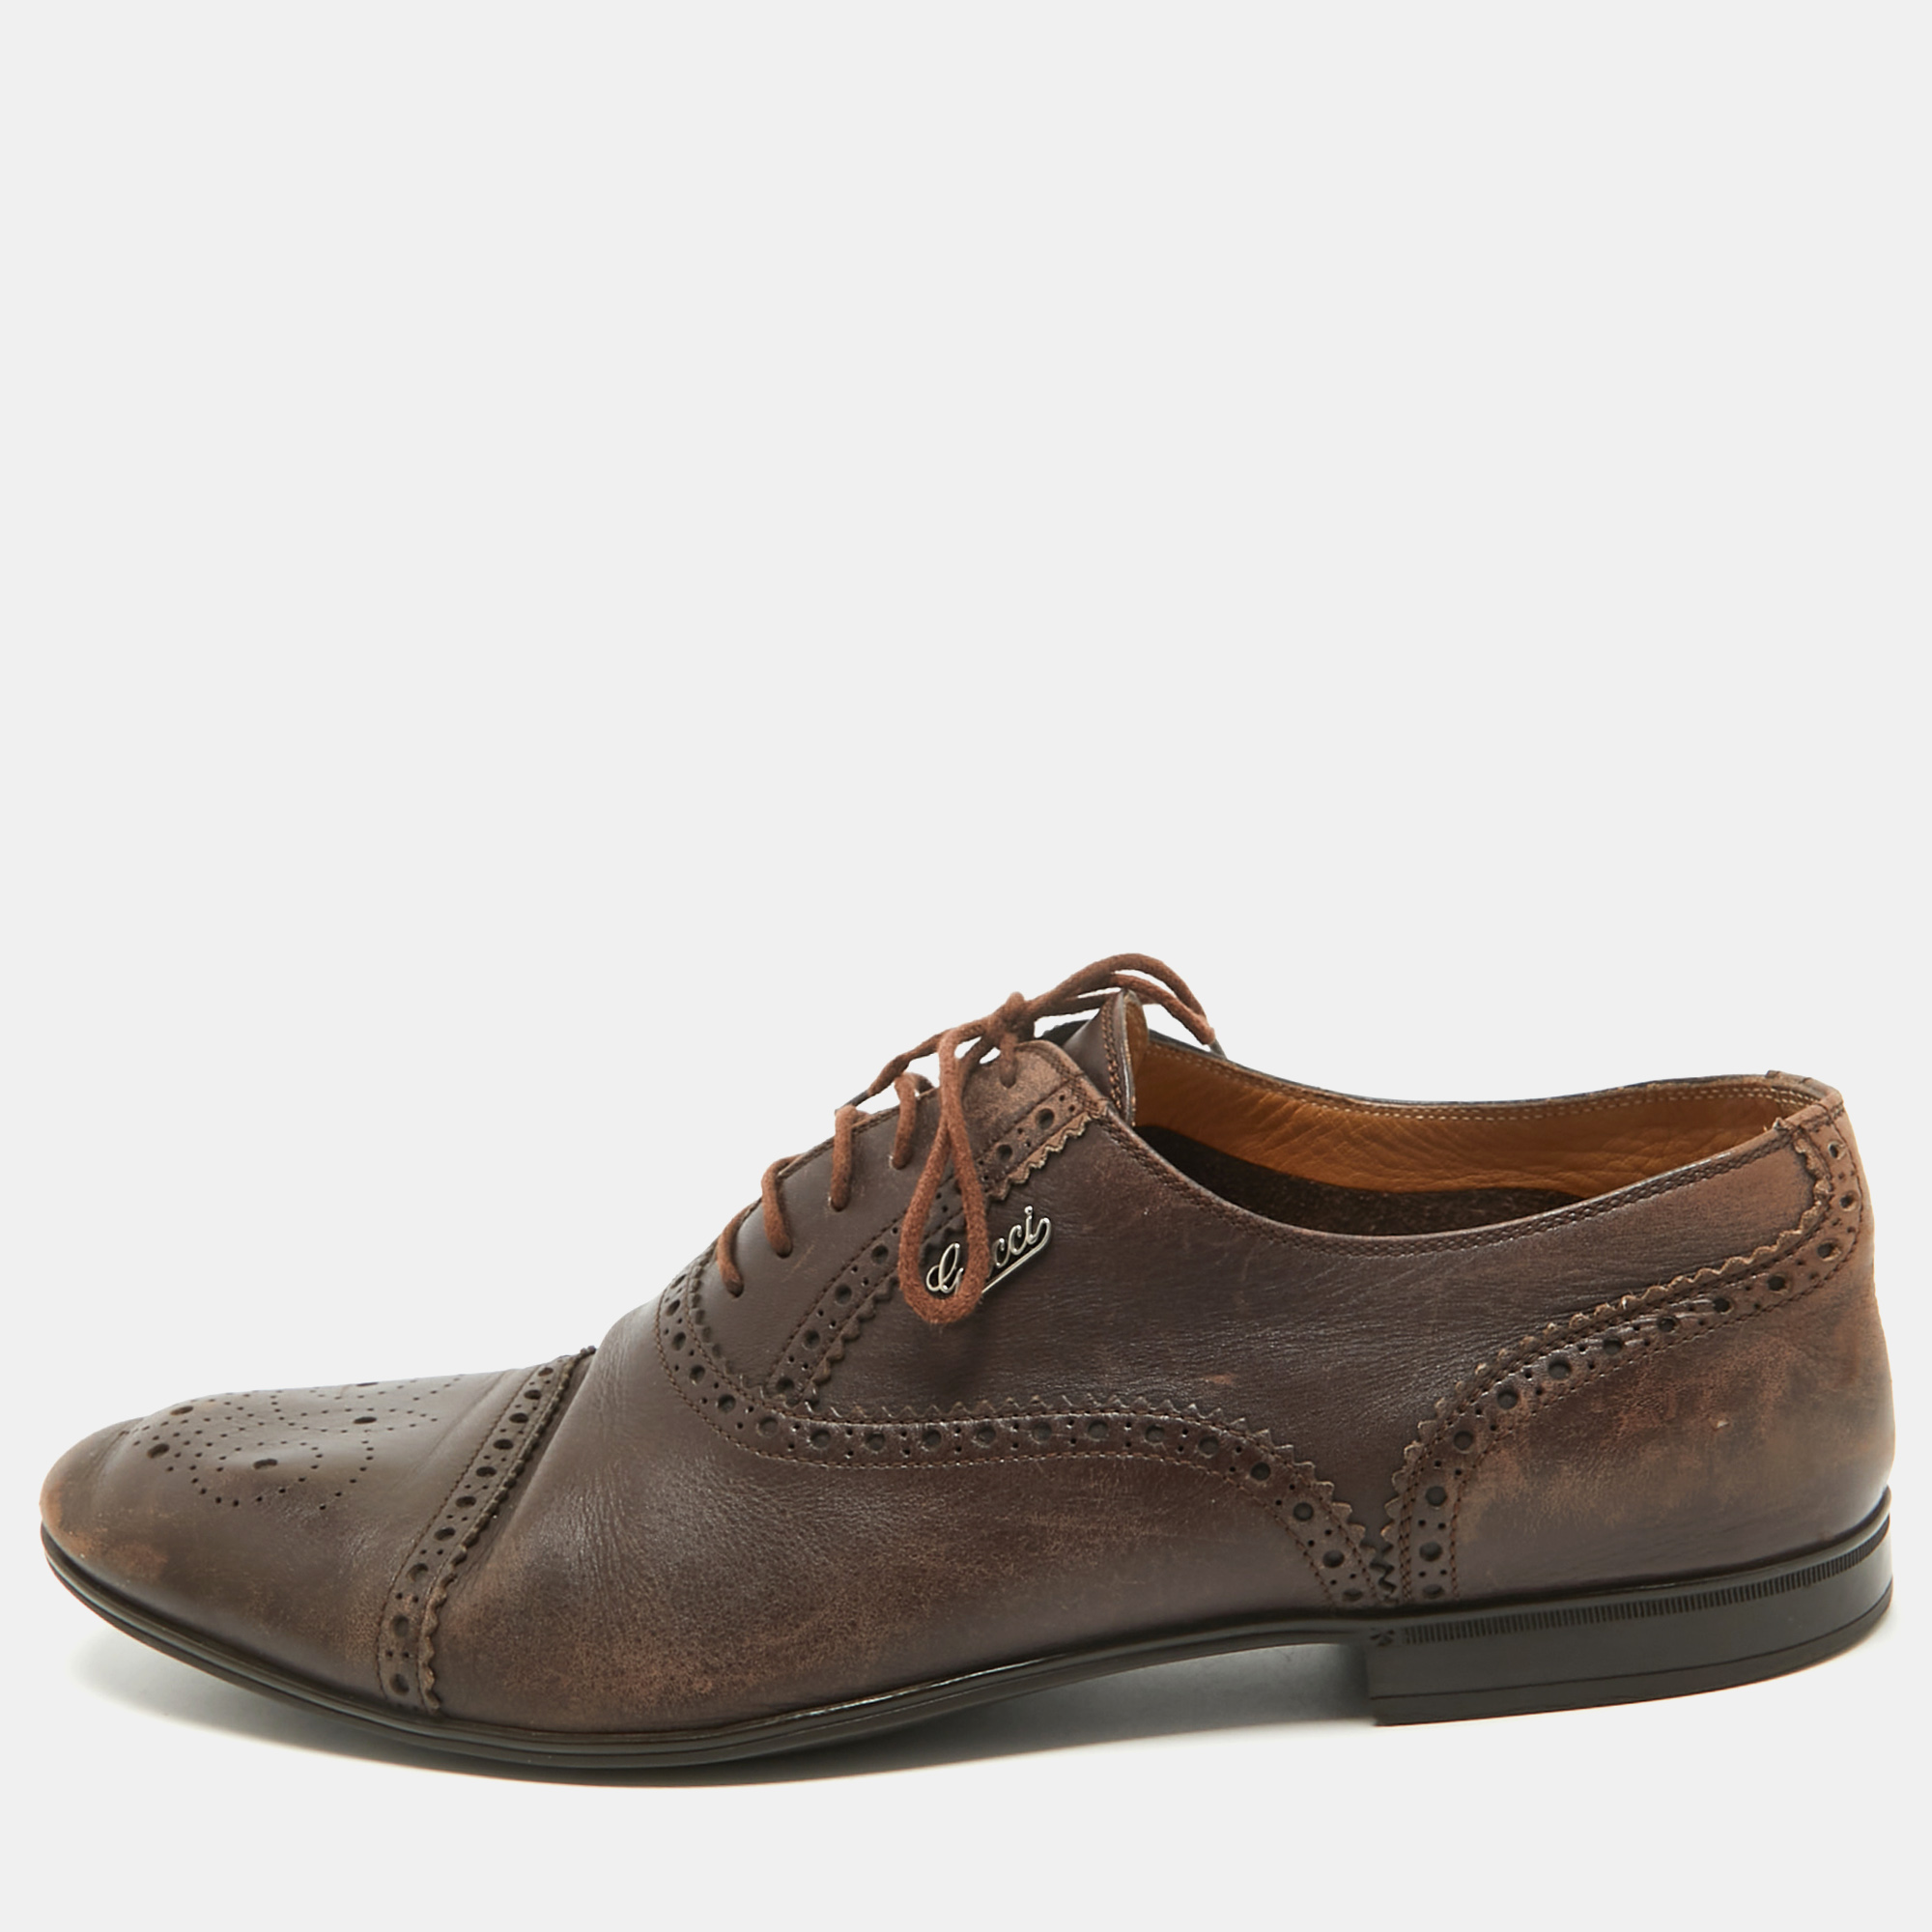 

Gucci Brown Leather Lace Up Brogue Oxfords Size